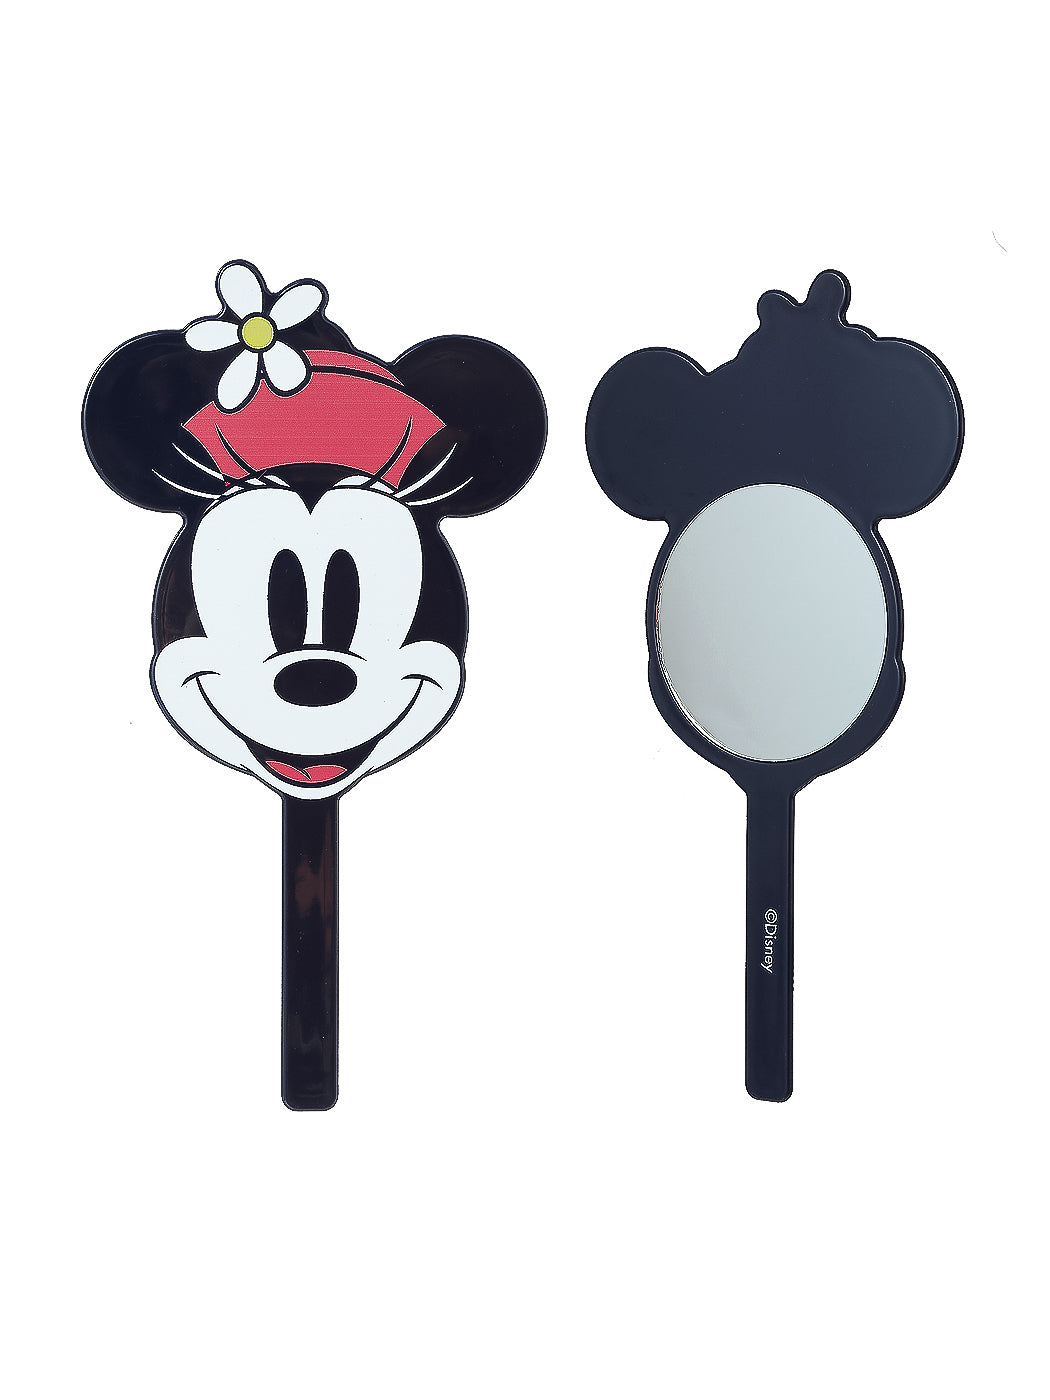 MINISO MICKEY MOUSE COLLECTION 2.0 HANDHELD MIRROR(MINNIE) 2010530110108 PORTABLE MIRROR